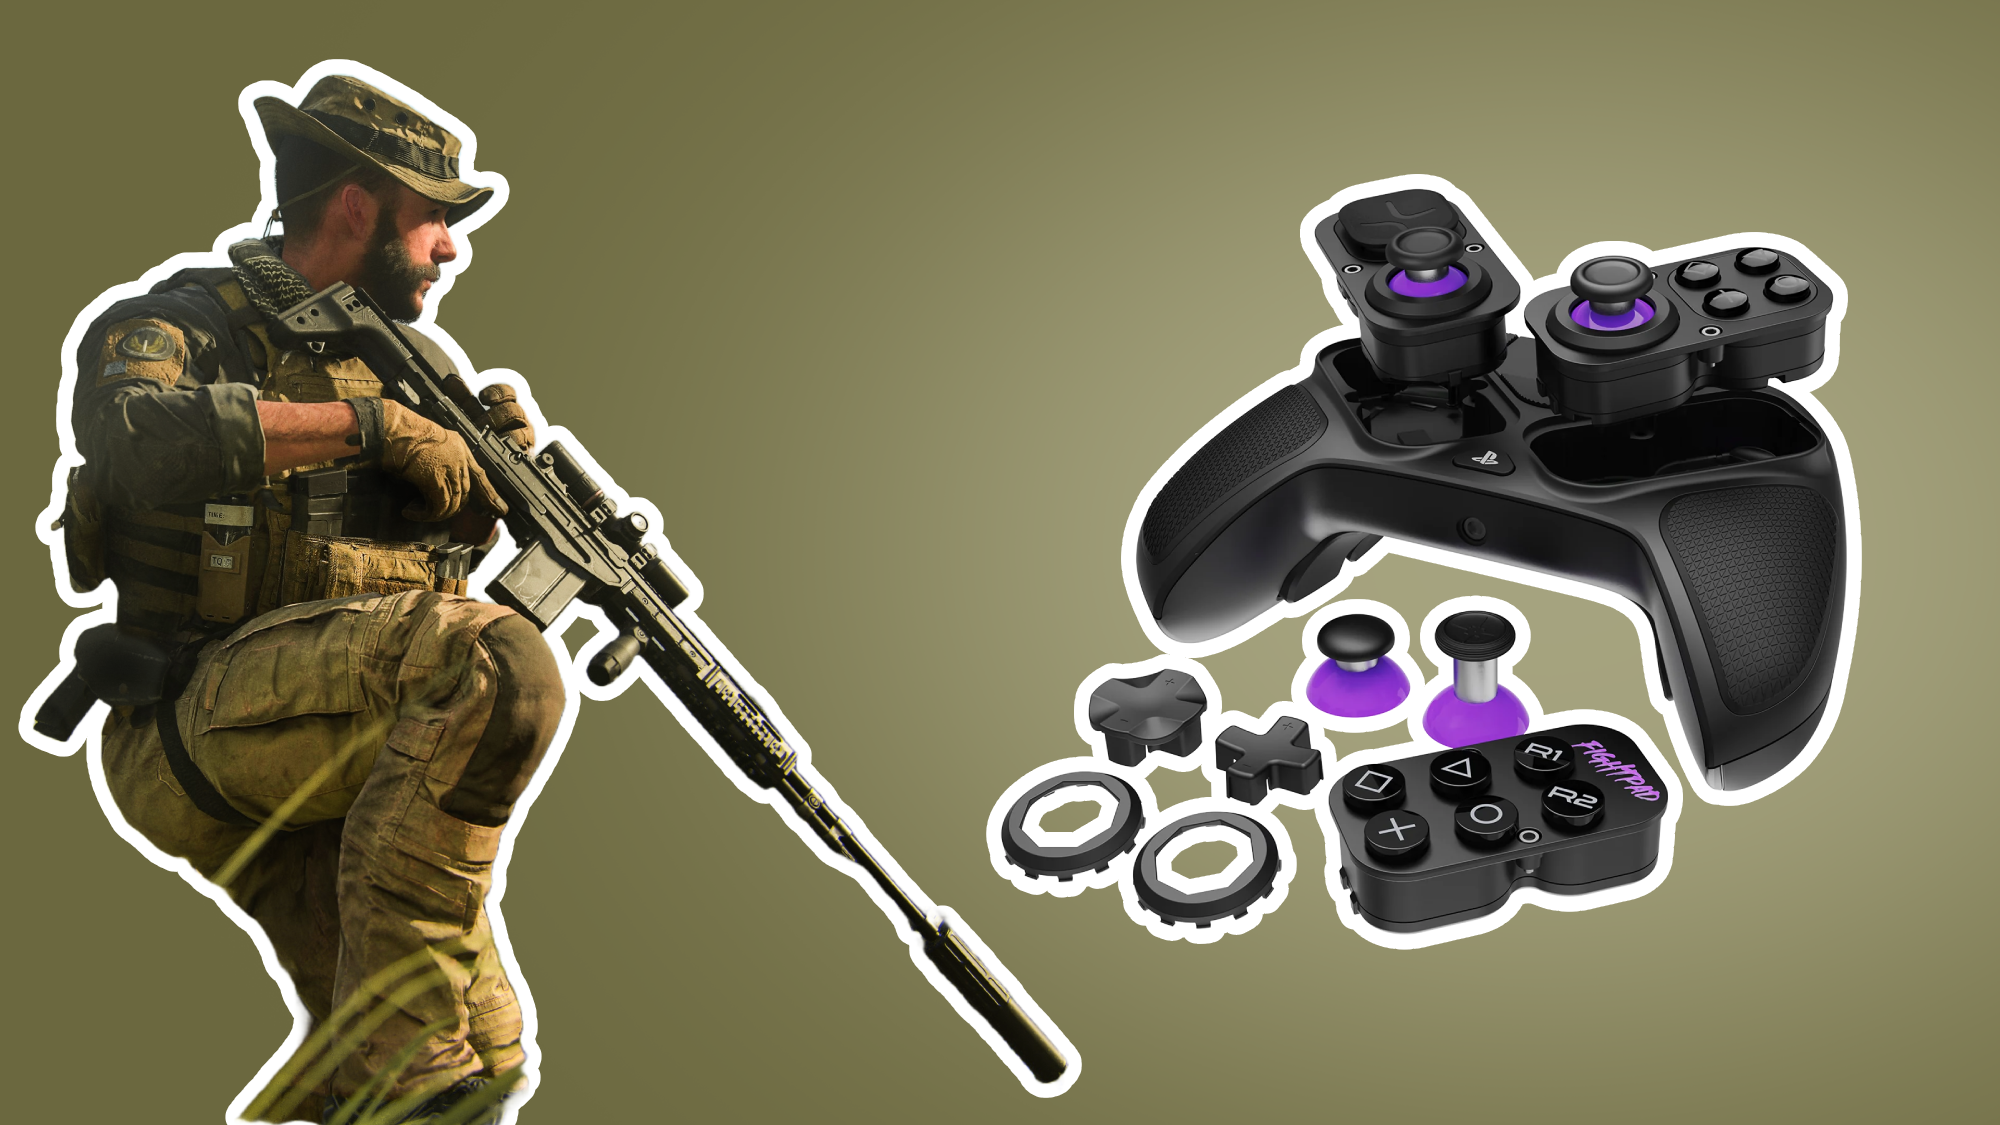 COD Mobile: Best Controllers Deals for the Season 9 update!